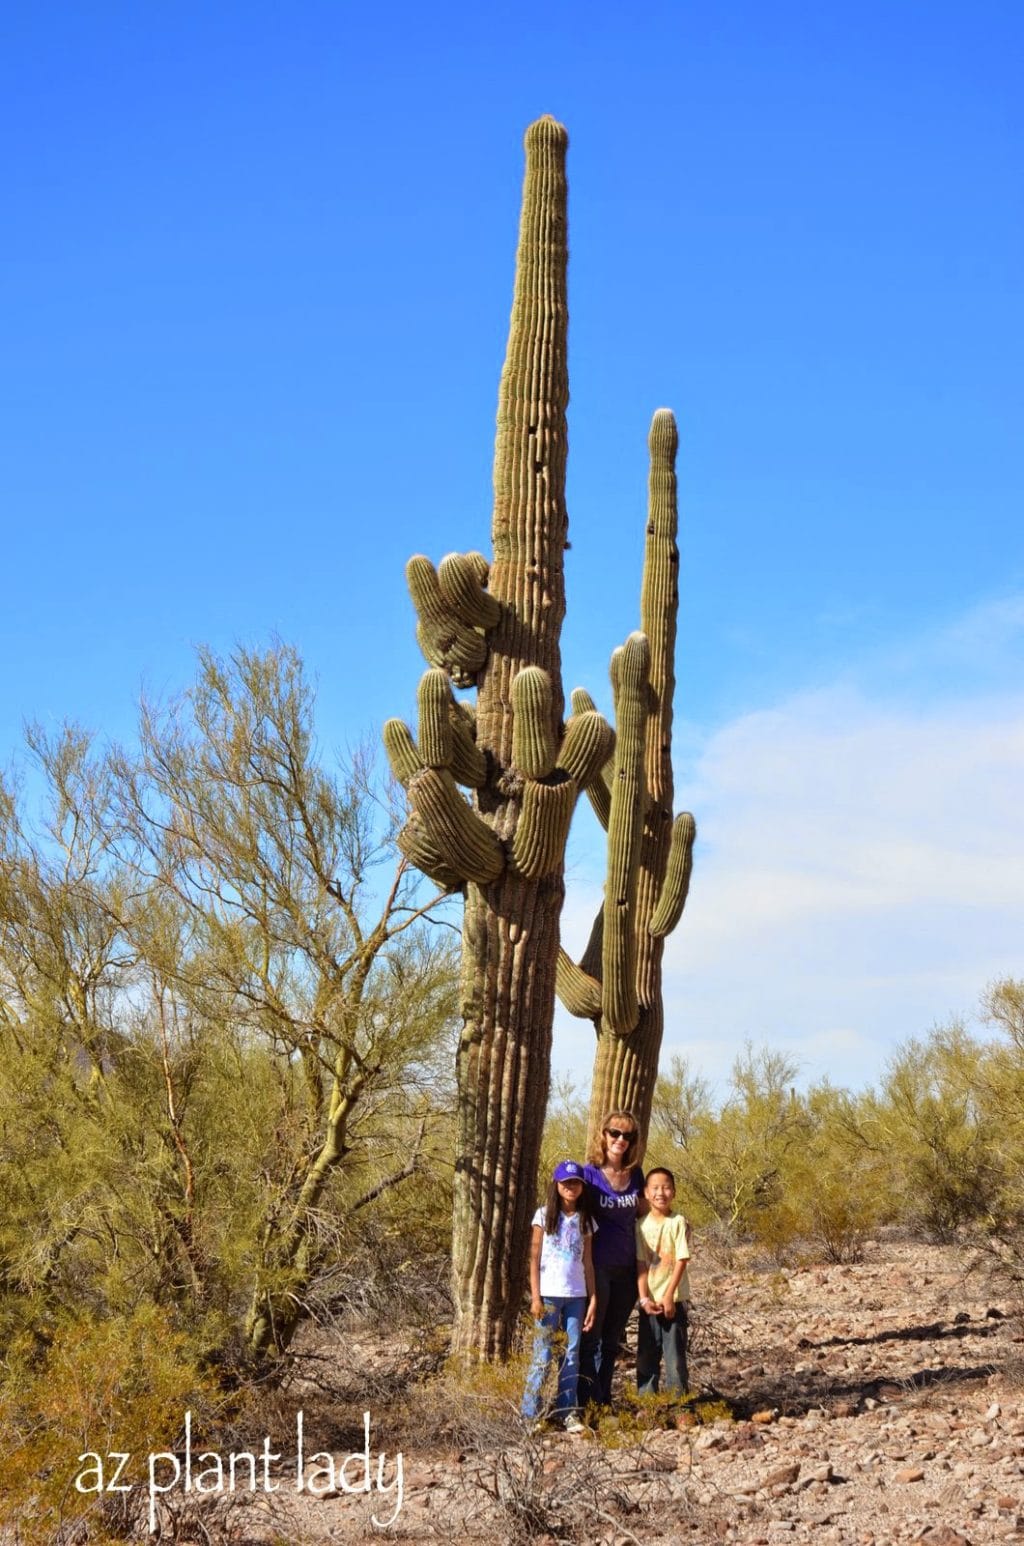 My two youngest kids and I on a recent visit to the Tucson desert.